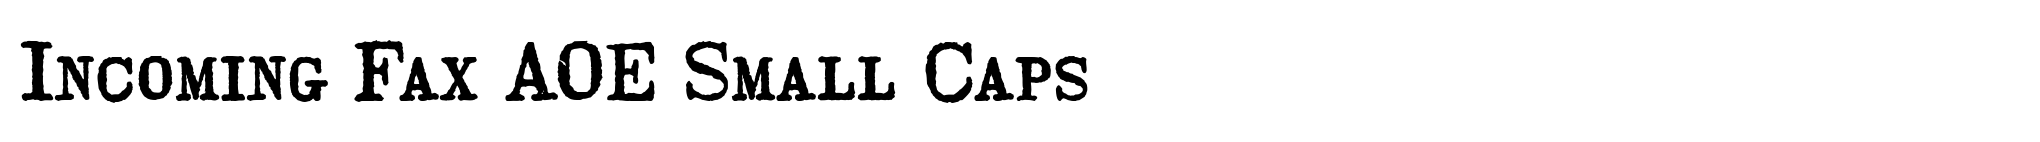 Incoming Fax AOE Small Caps image